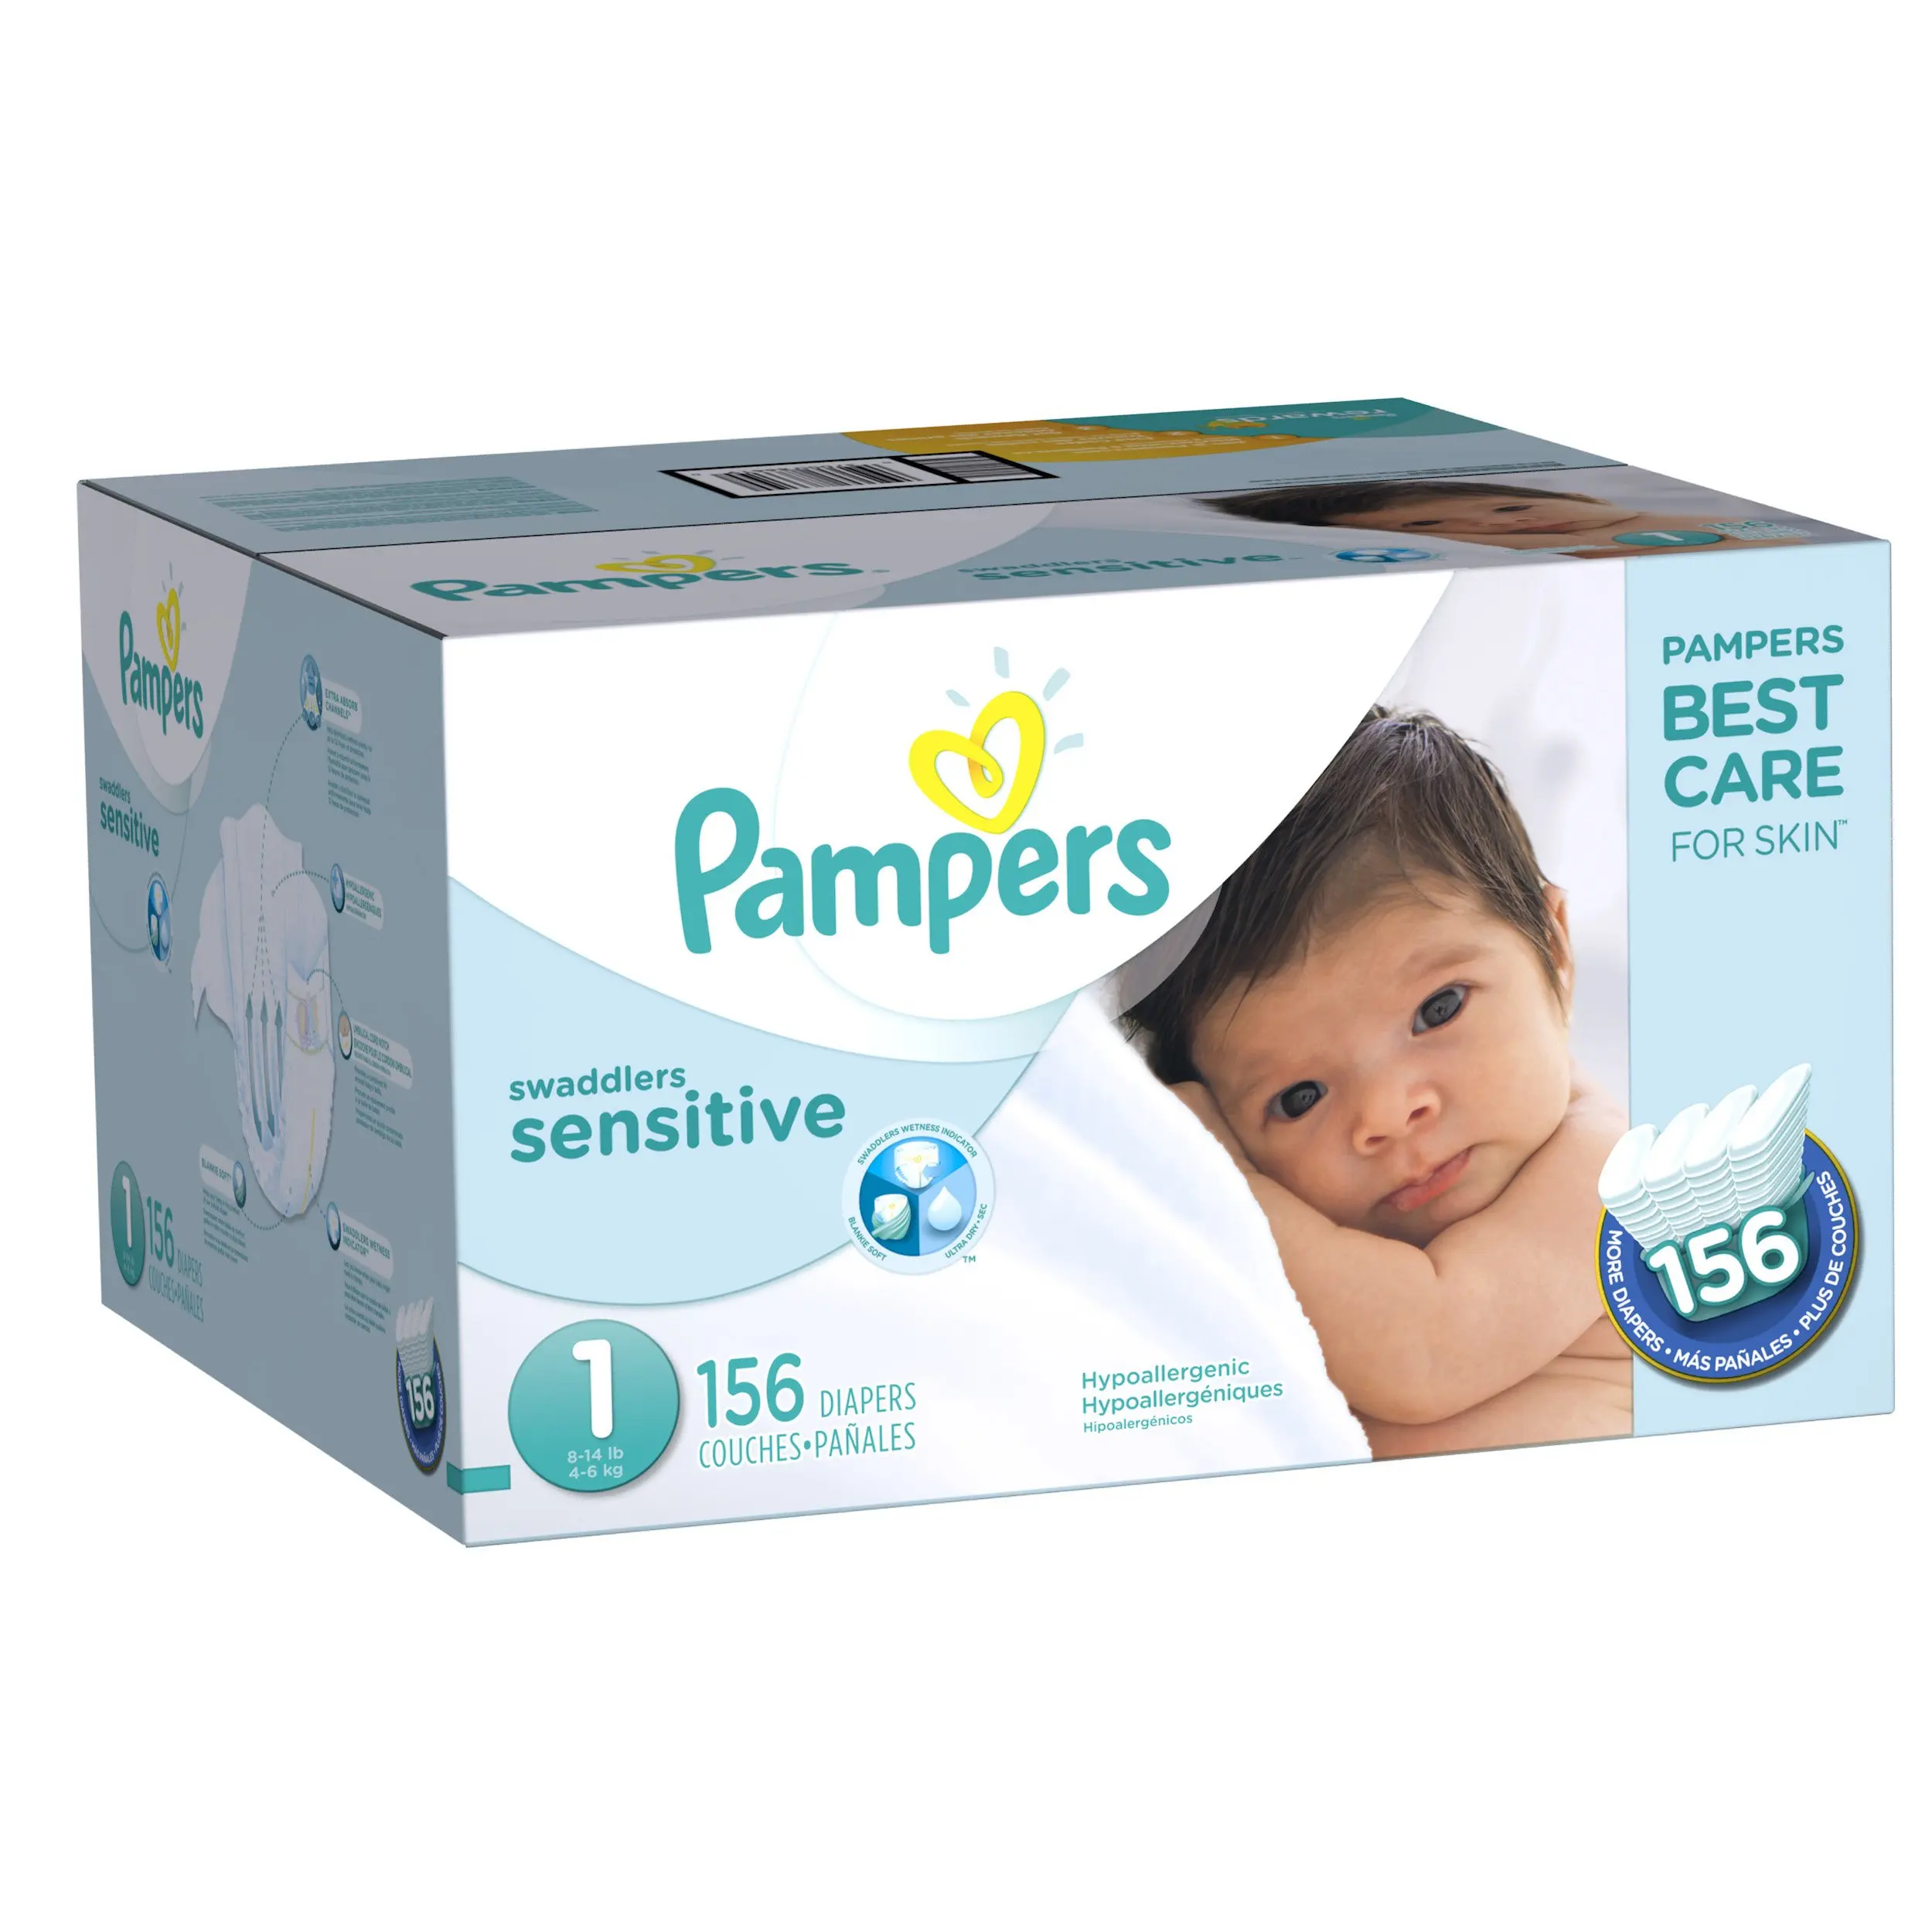 pampers swaddlers newborn 84 count